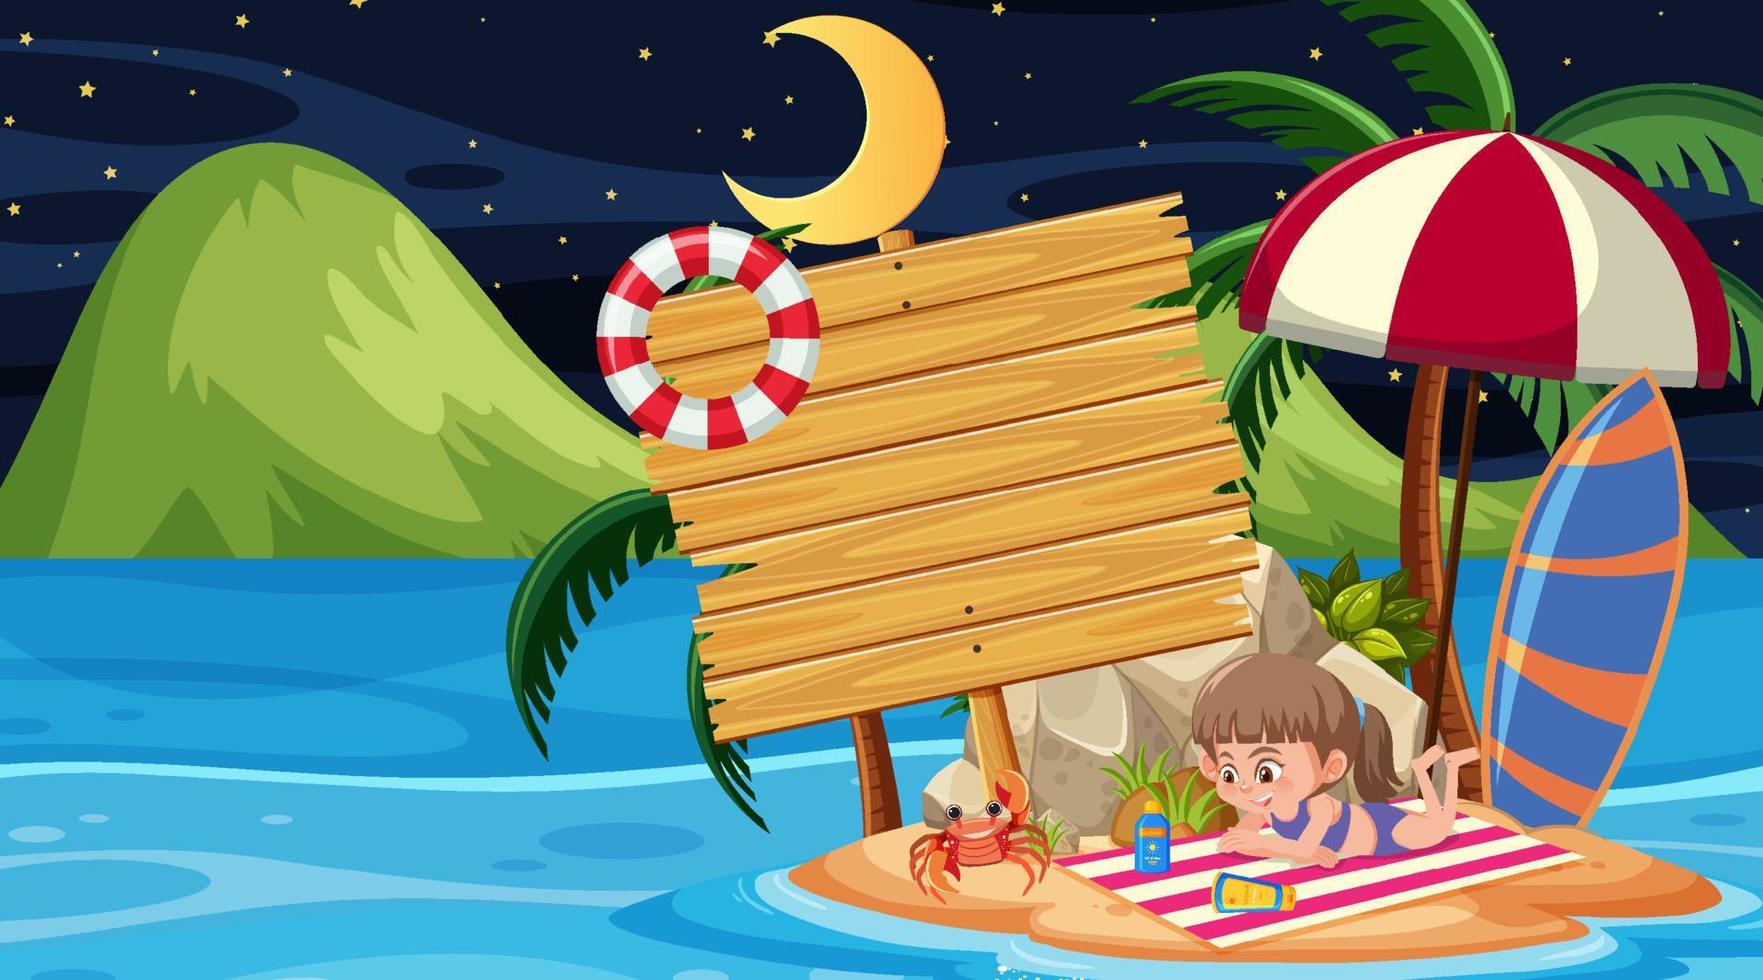 Kids on summer vacation at the beach night scene with an empty wooden banner